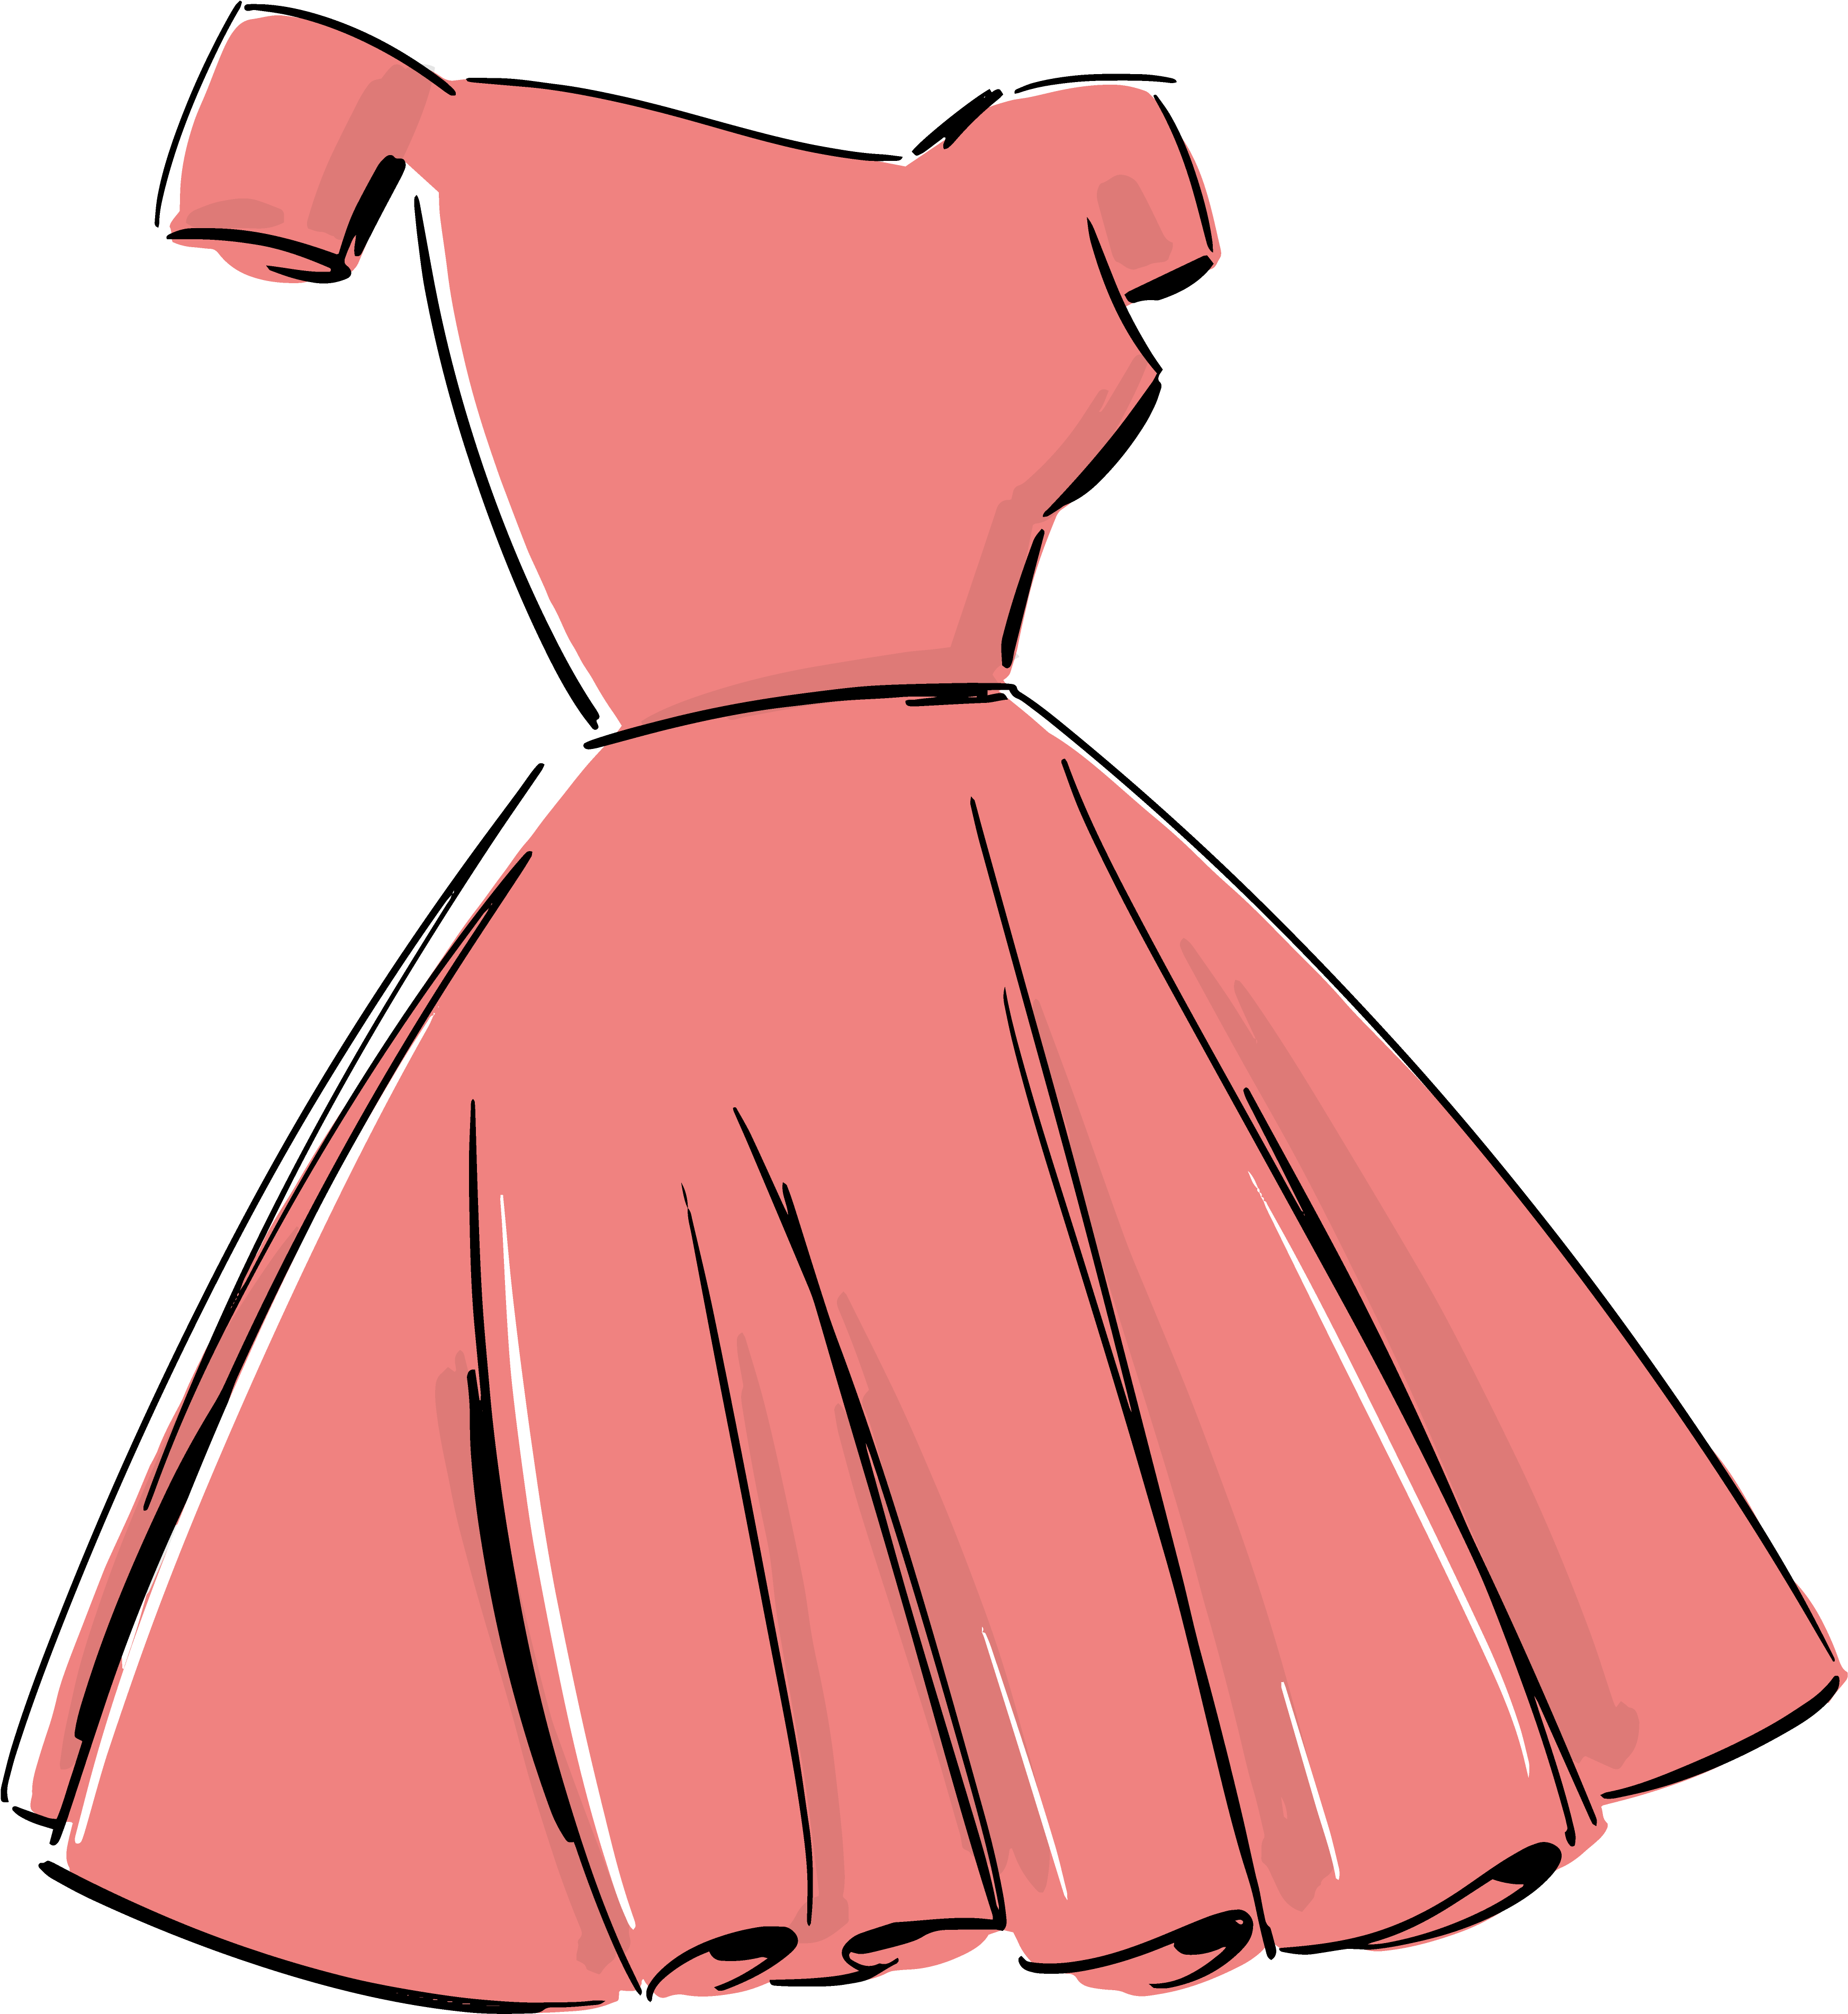 Dress Skirt Art Hand - Dress Clipart - Large Size Png Image - PikPng.